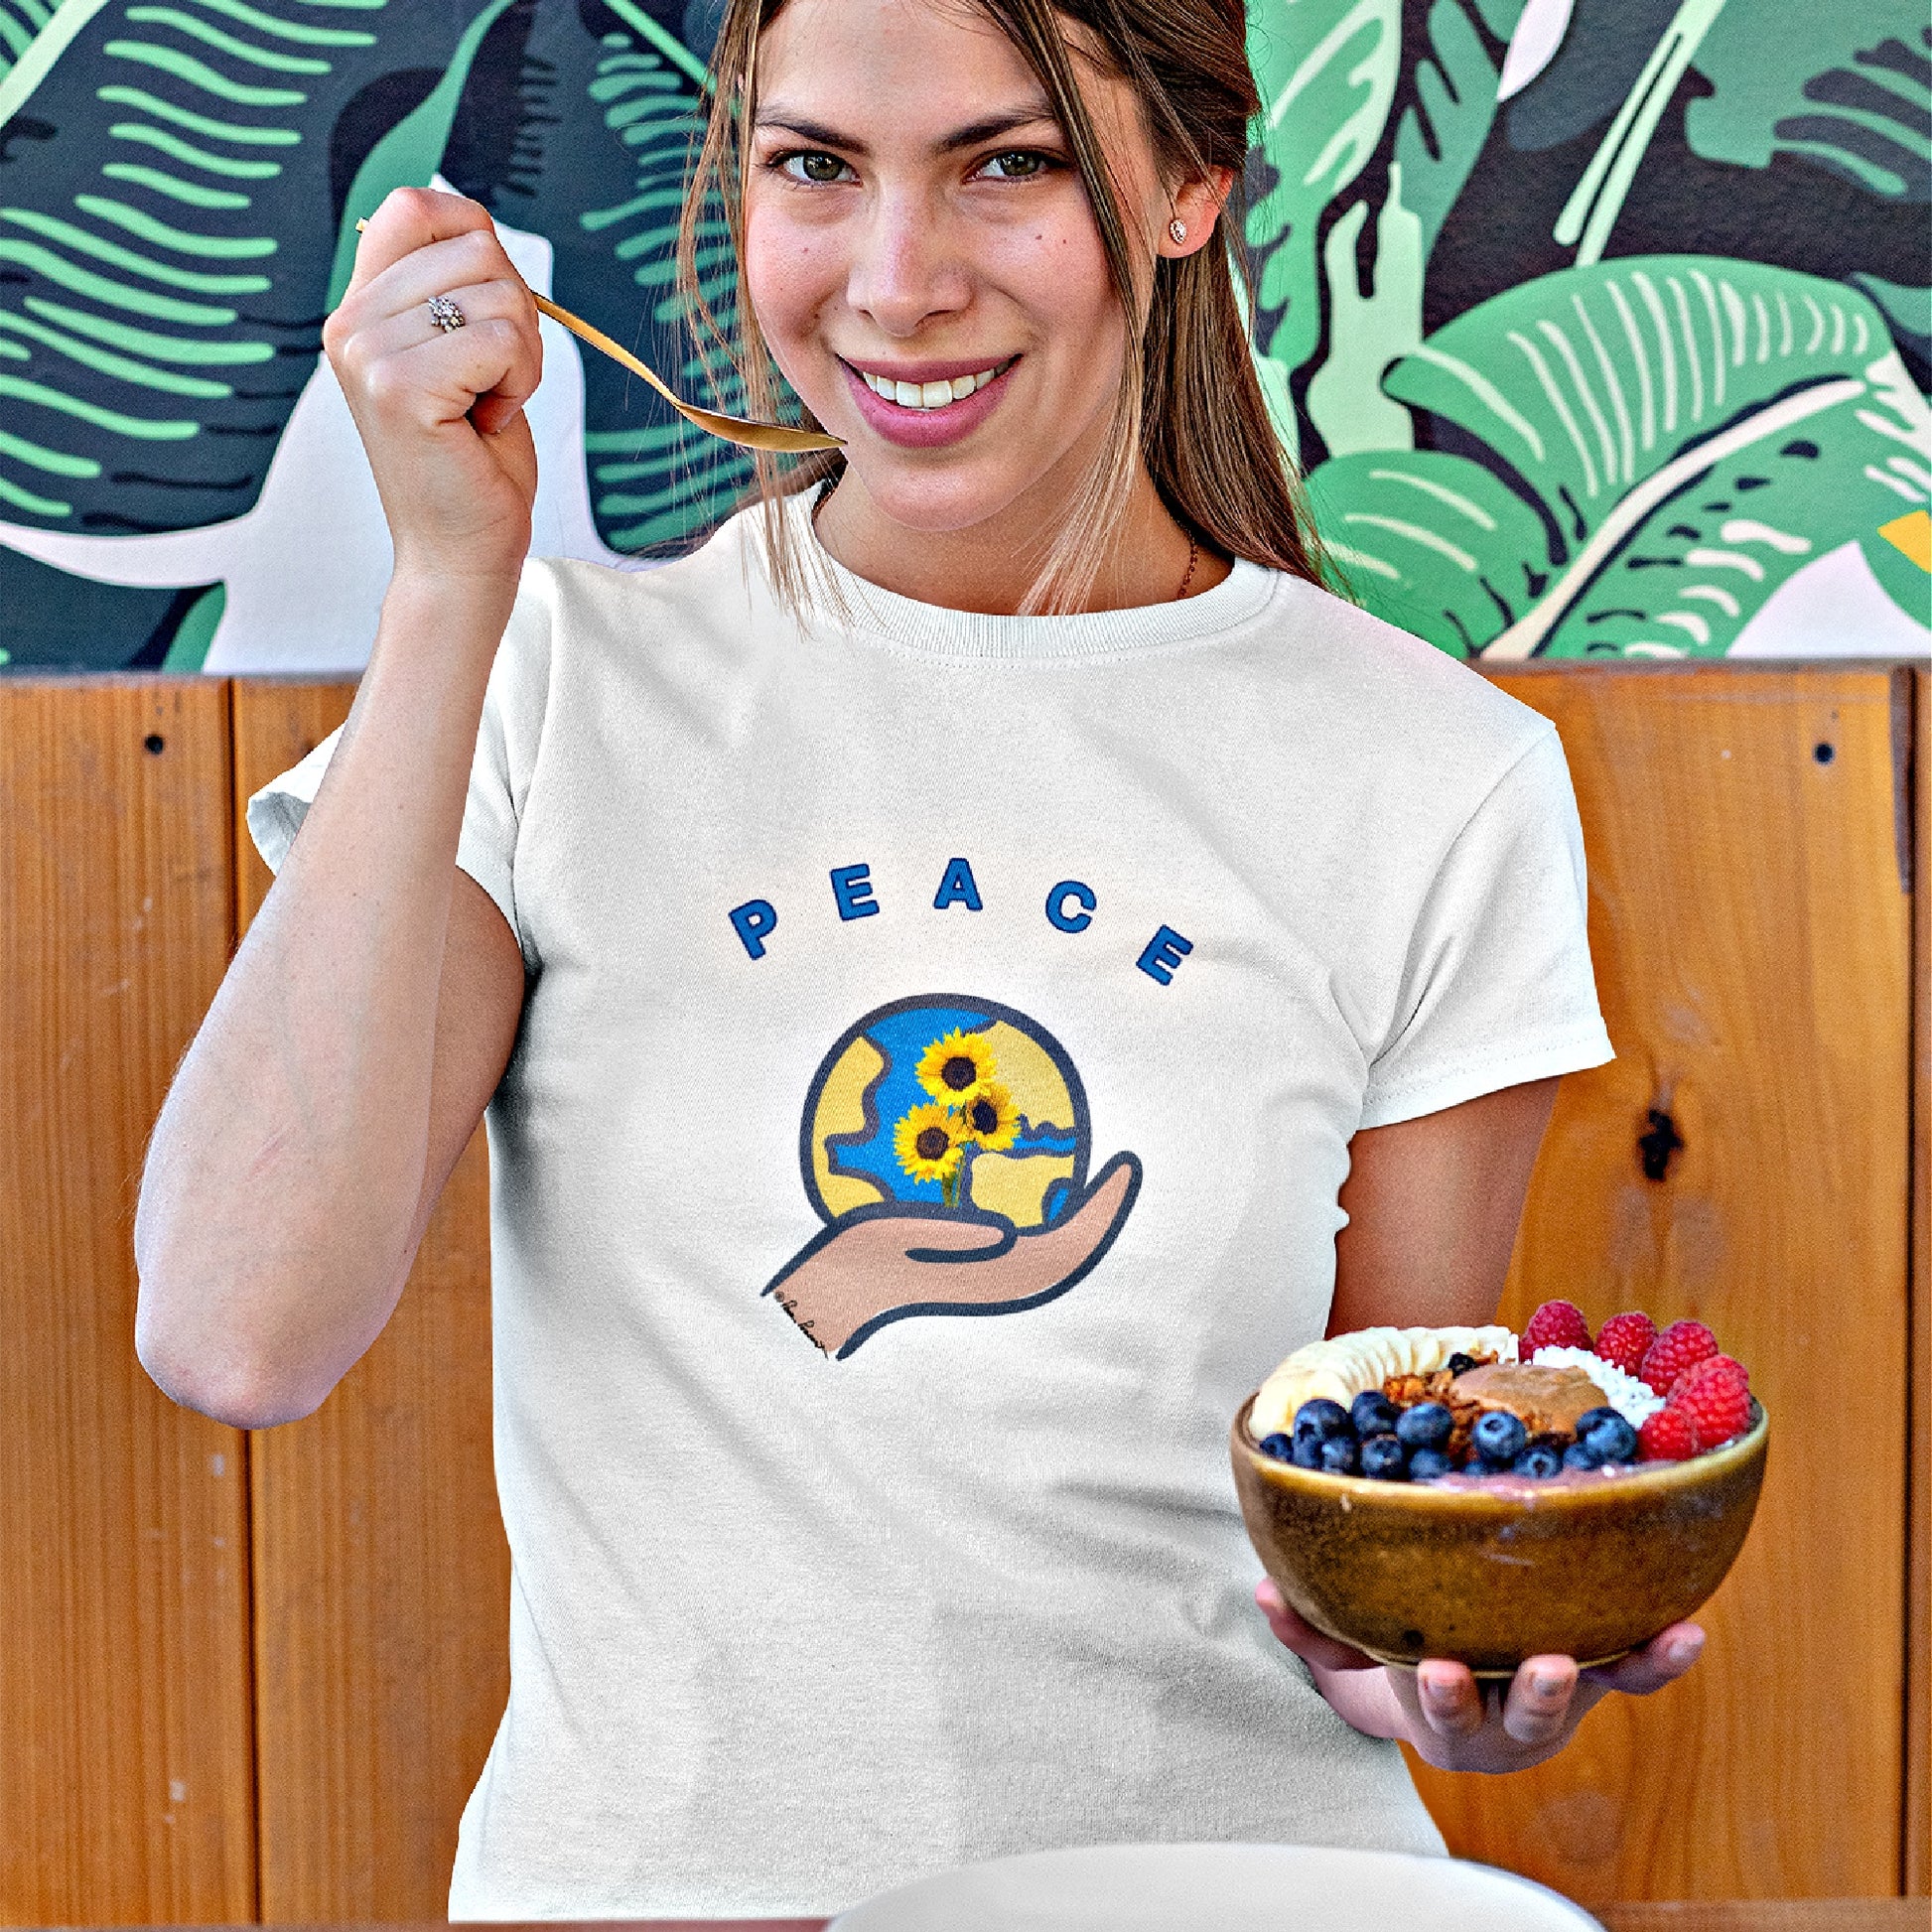 Mock up of a woman wearing our slim-fit t-shirt while eating a healthy fruit bowl